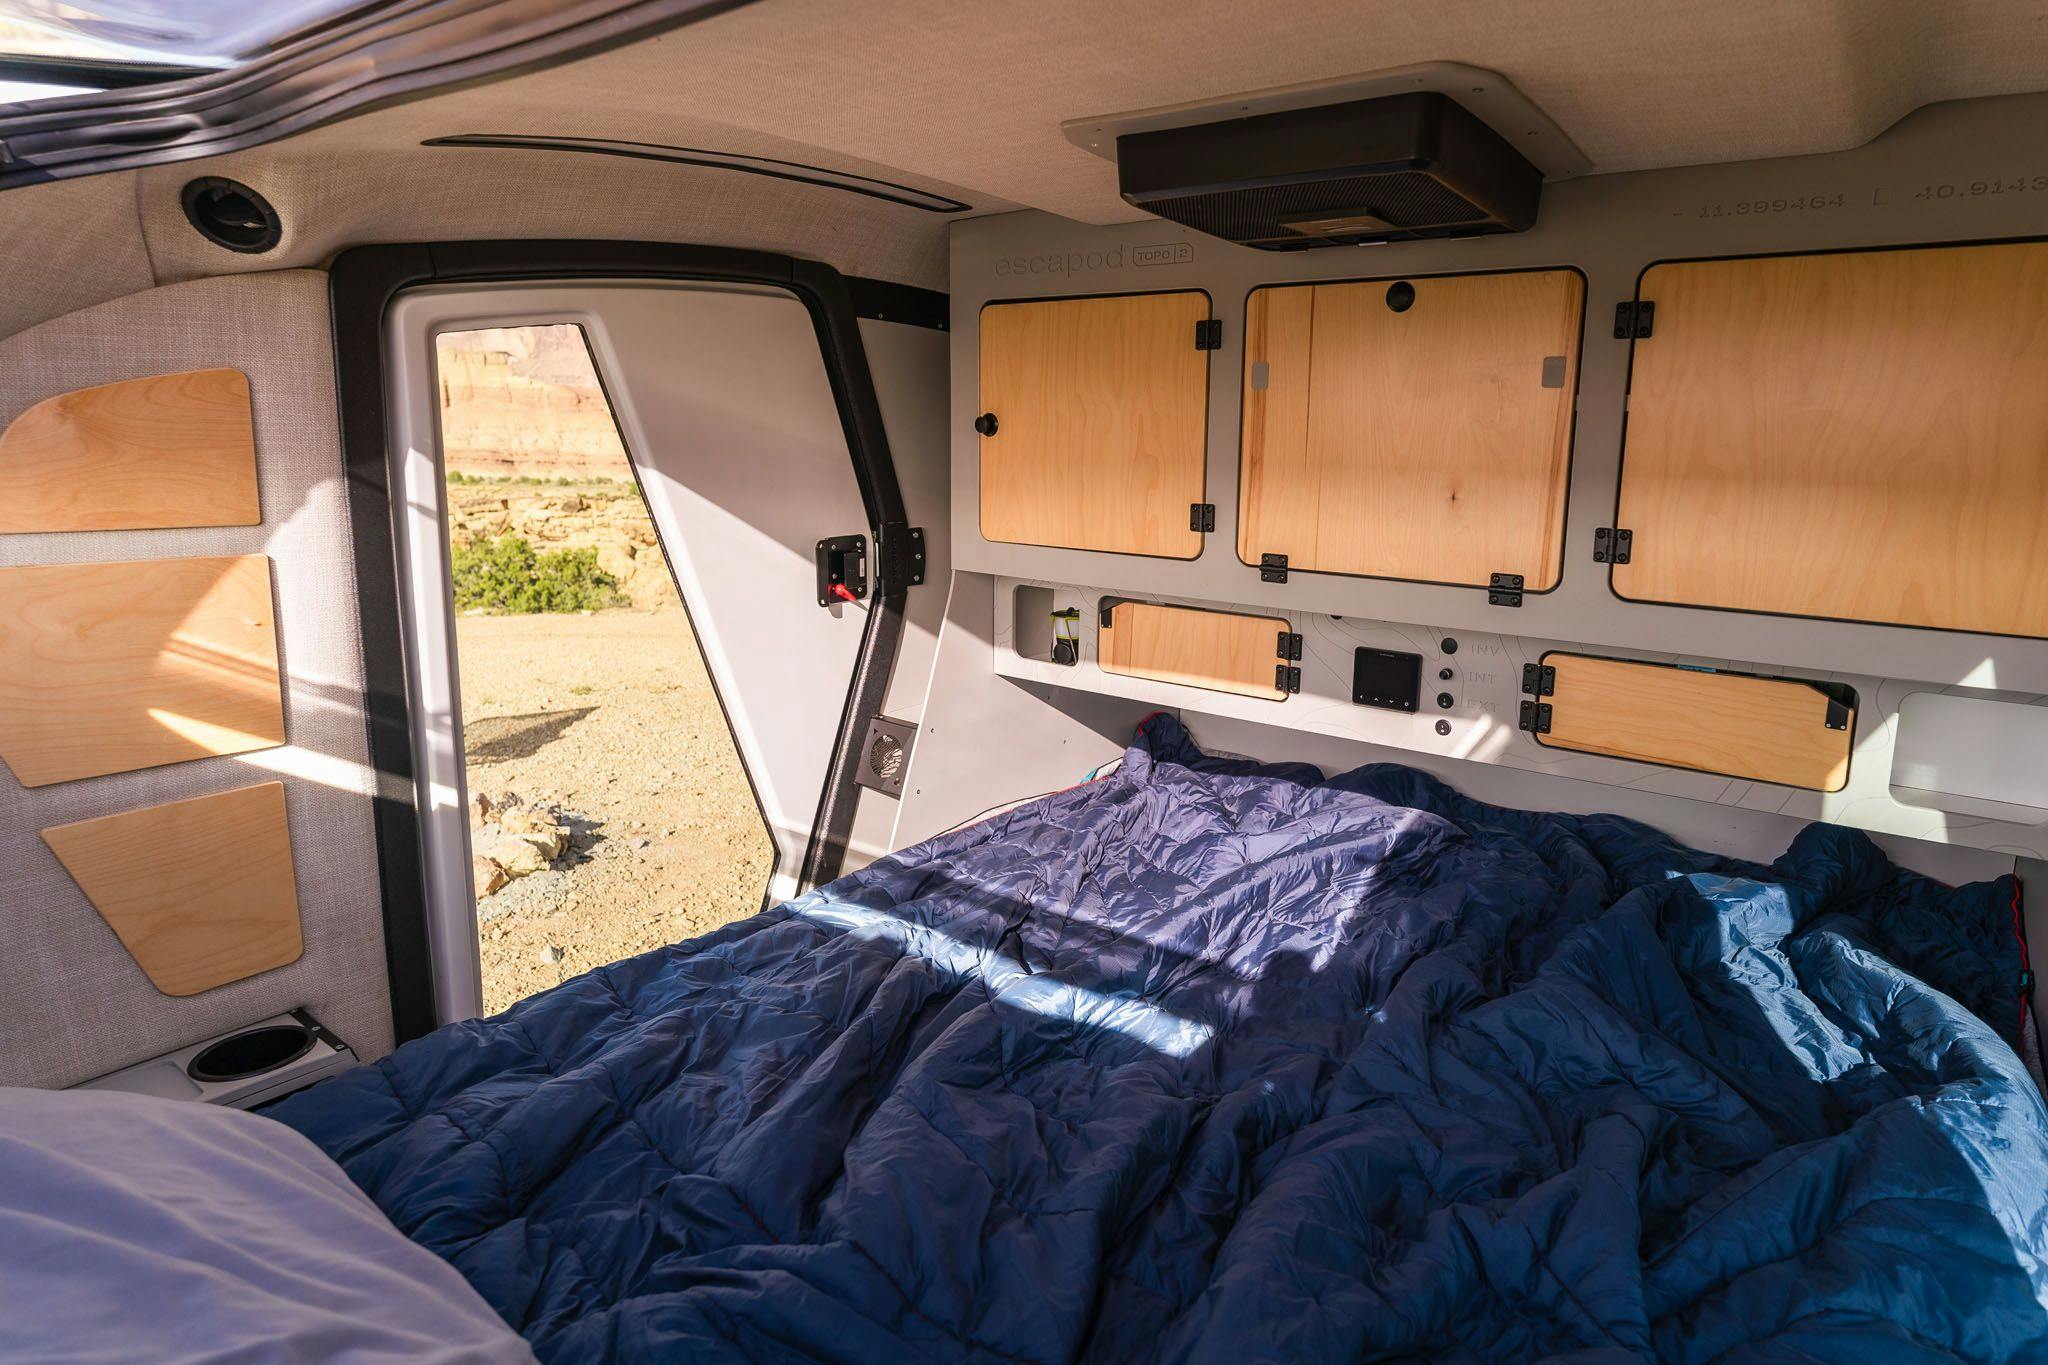 The interior of the TOPO2, a teardrop trailer, with a true queen mattress, cabinets for storage, and more.